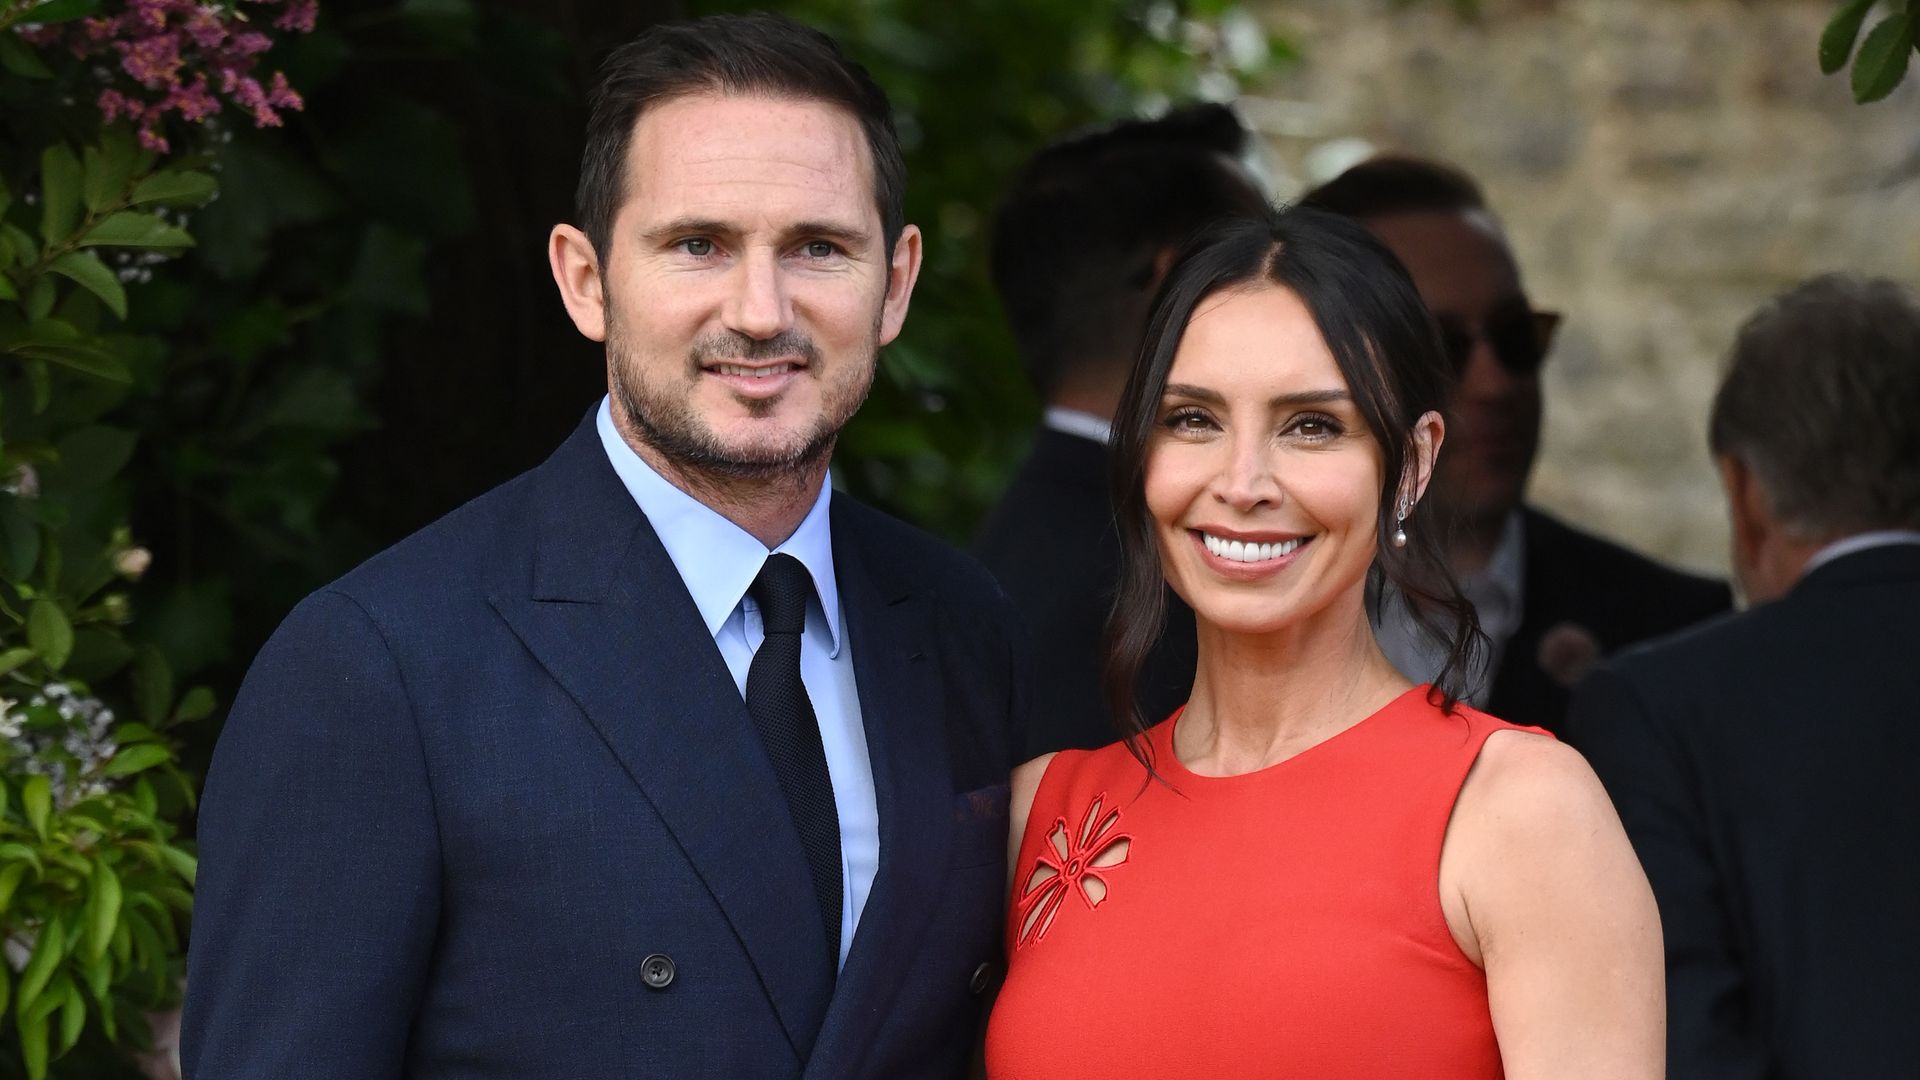 Christine Lampard's rarely seen step-daughters Luna and Isla with husband Frank